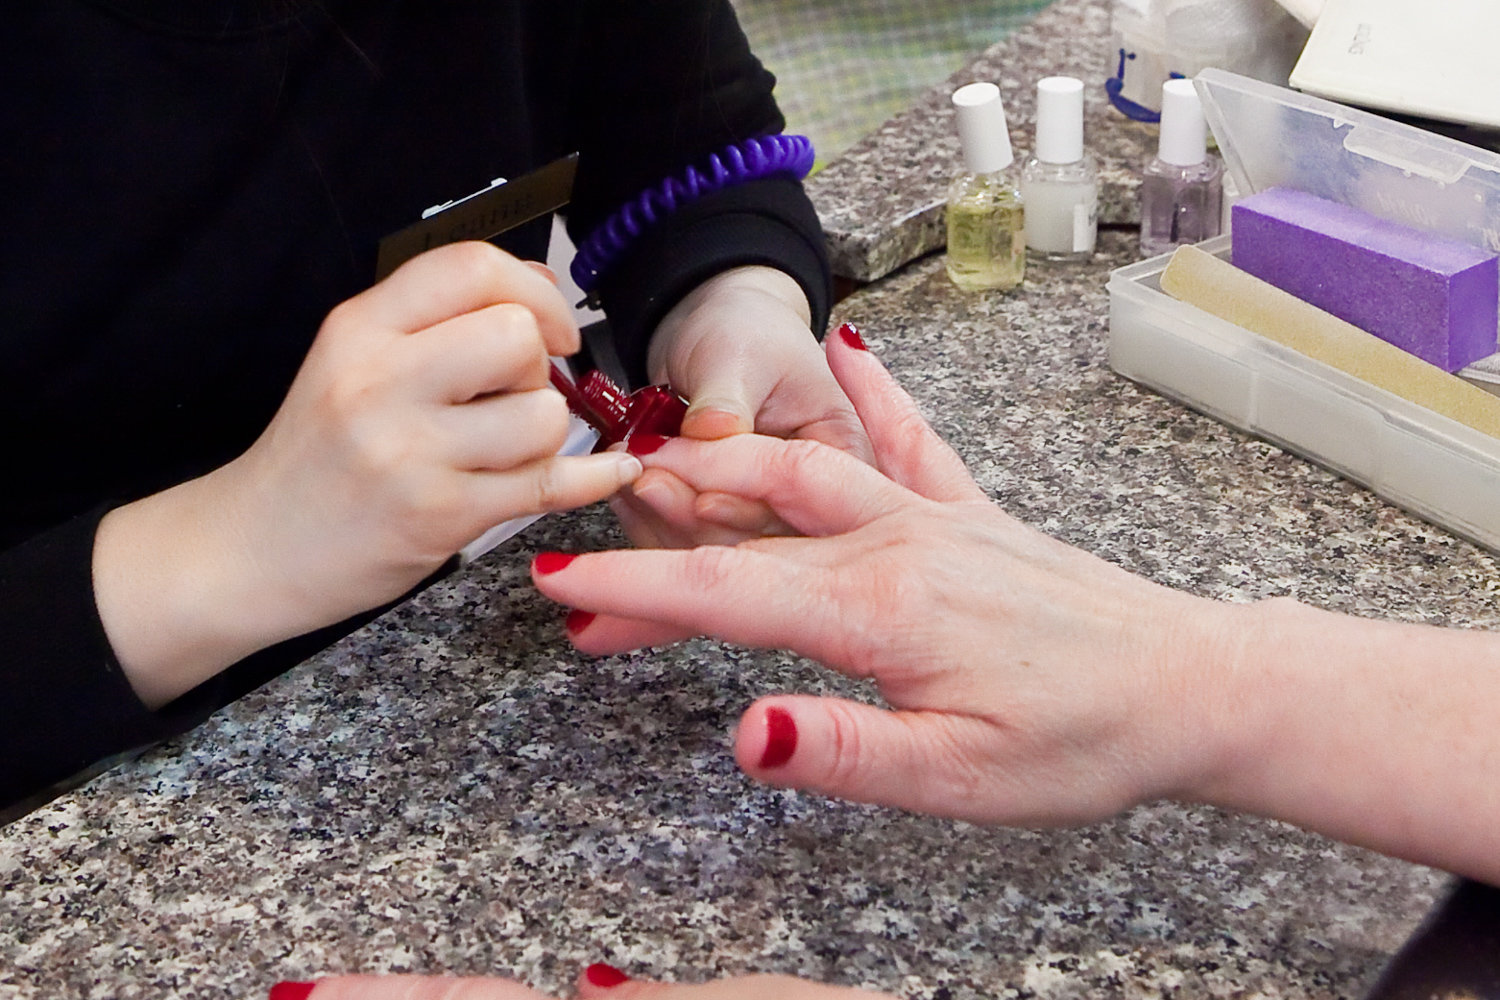 Nail salons are among the many small businesses slated to resume business during the city’s reopening process, but it’s unclear what these businesses will have to do to abide by new guidelines.